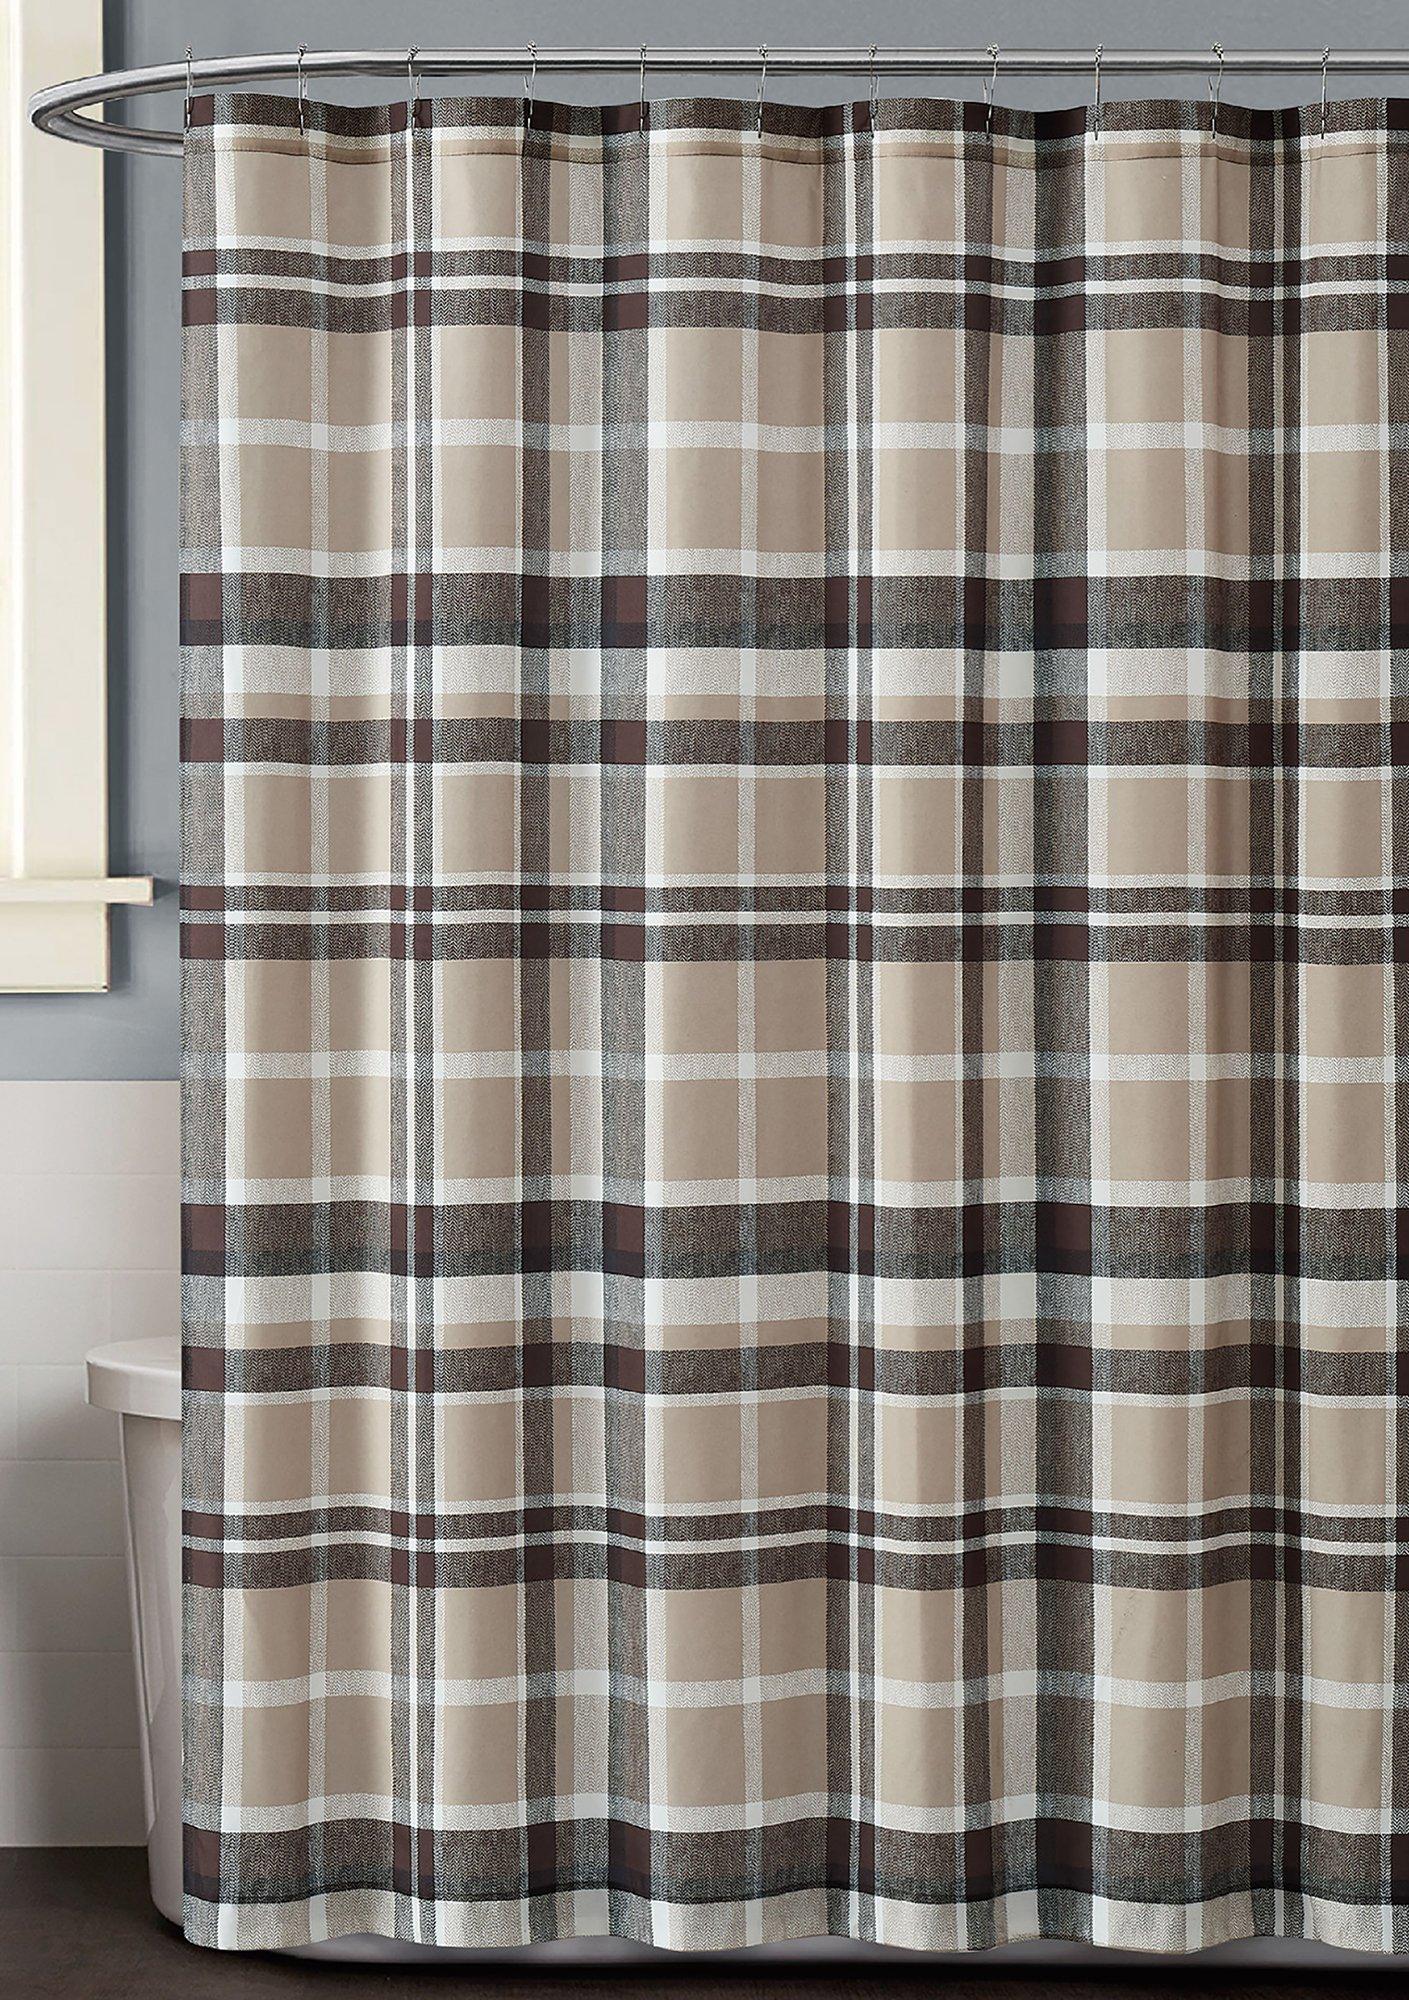 Photos - Other sanitary accessories Truly Soft Paulette Plaid Shower Curtain